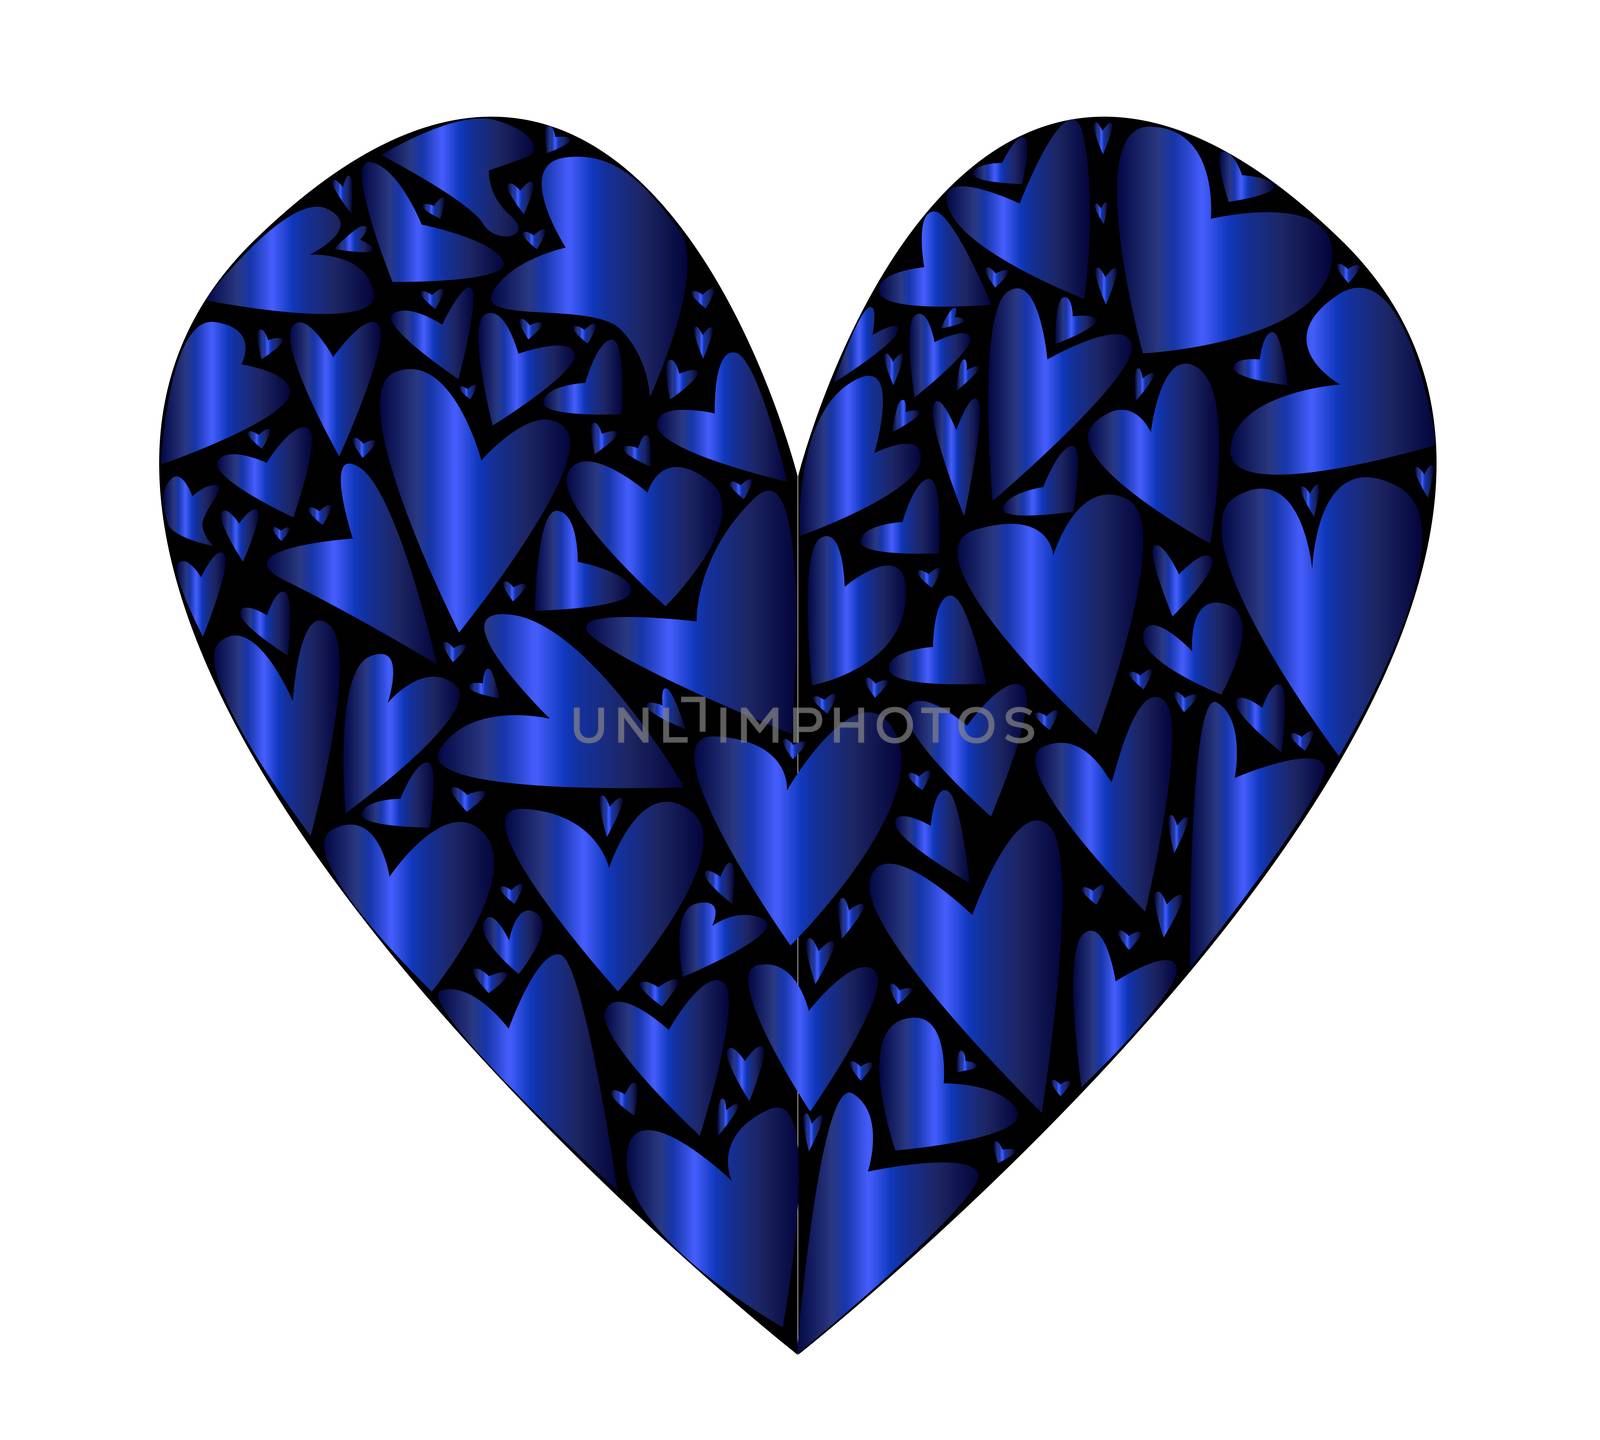 A large heart made up of several smaller hearts against a white background.